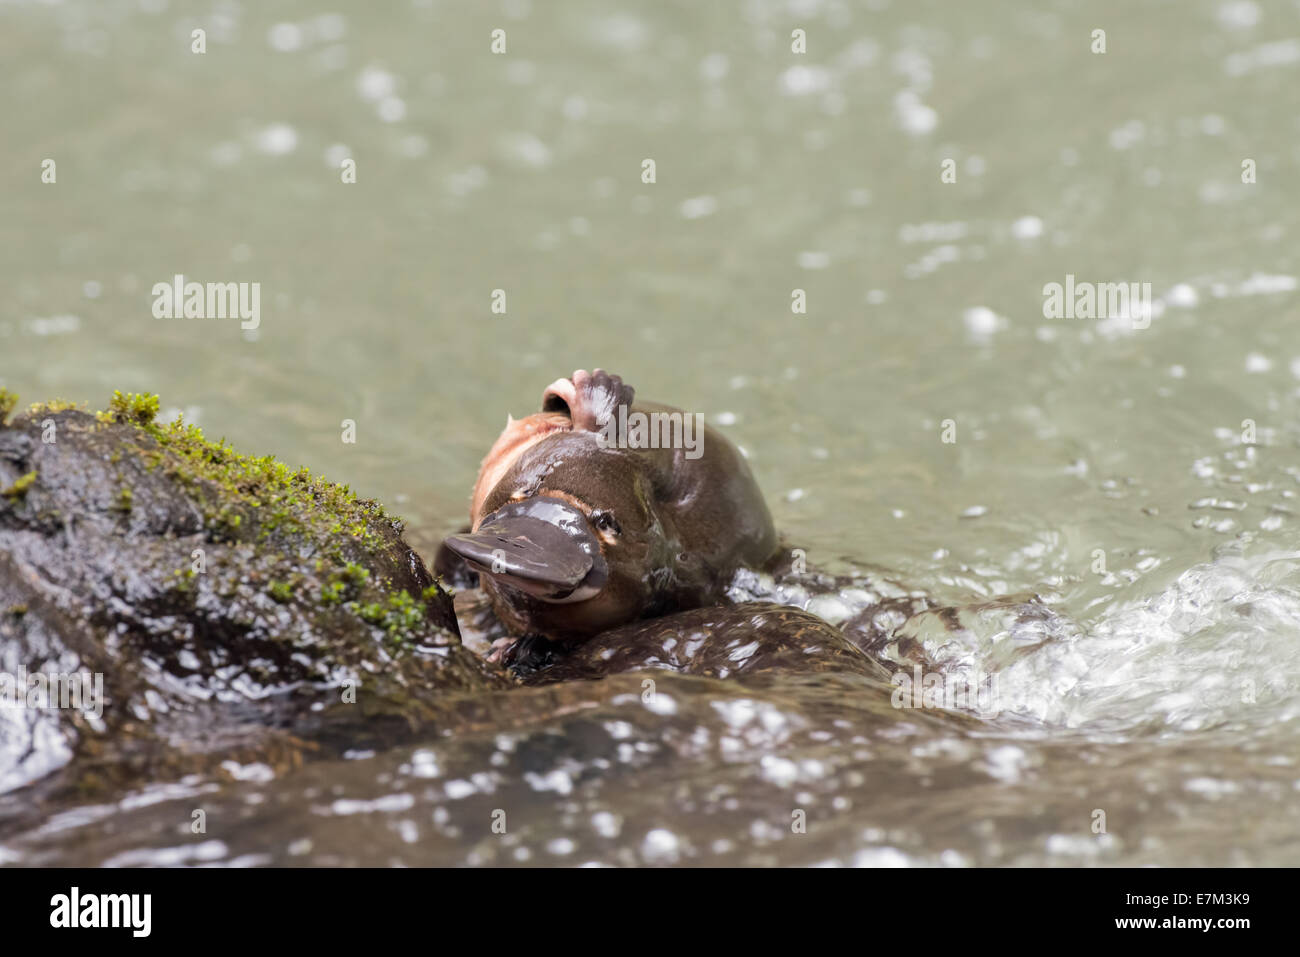 Stock photo of a duck-billed platypus climbing out of the water onto a rock, Atherton Tablelands, Queensland, Australia Stock Photo